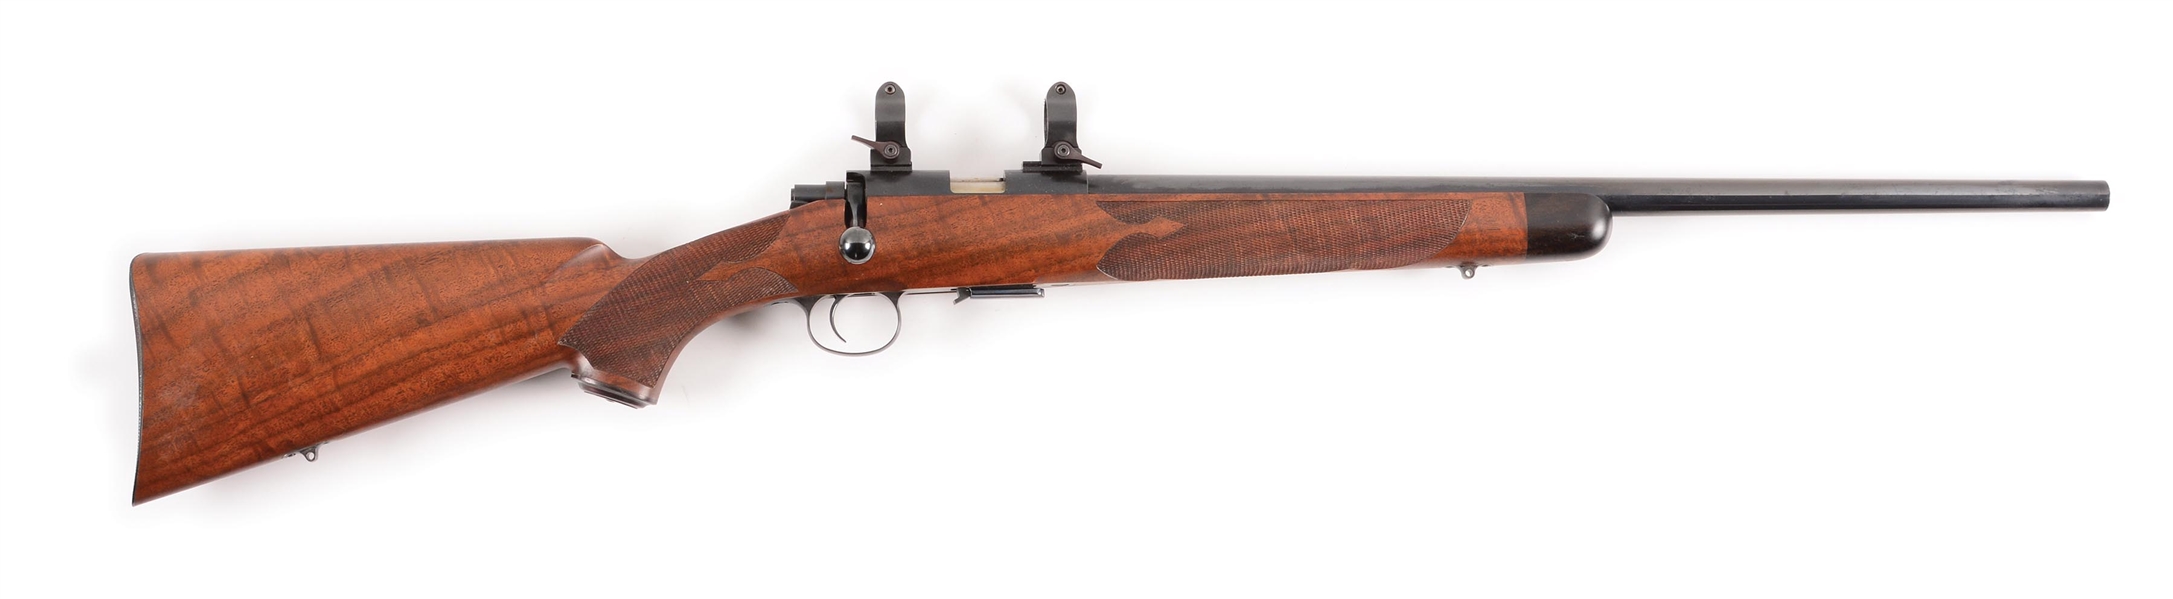 (M)COOPER ARMS MODEL 36 BOLT ACTION RIFLE.